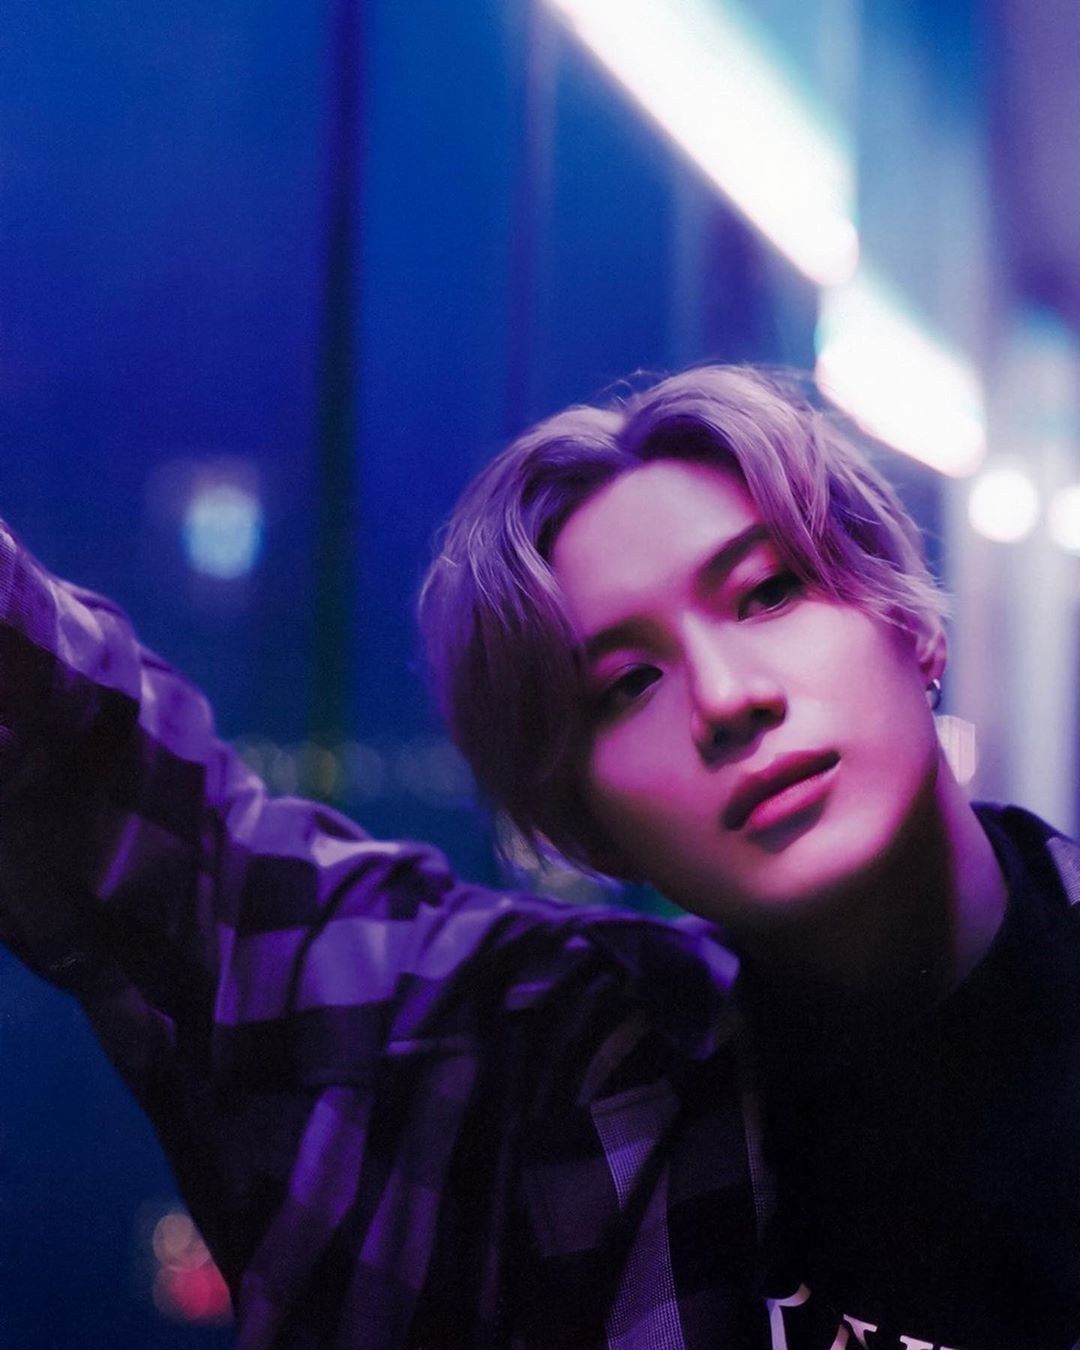 Taemin, a member of K-pop boy band SHINee, embarked on a solo career five years ago. Photo: Instagram